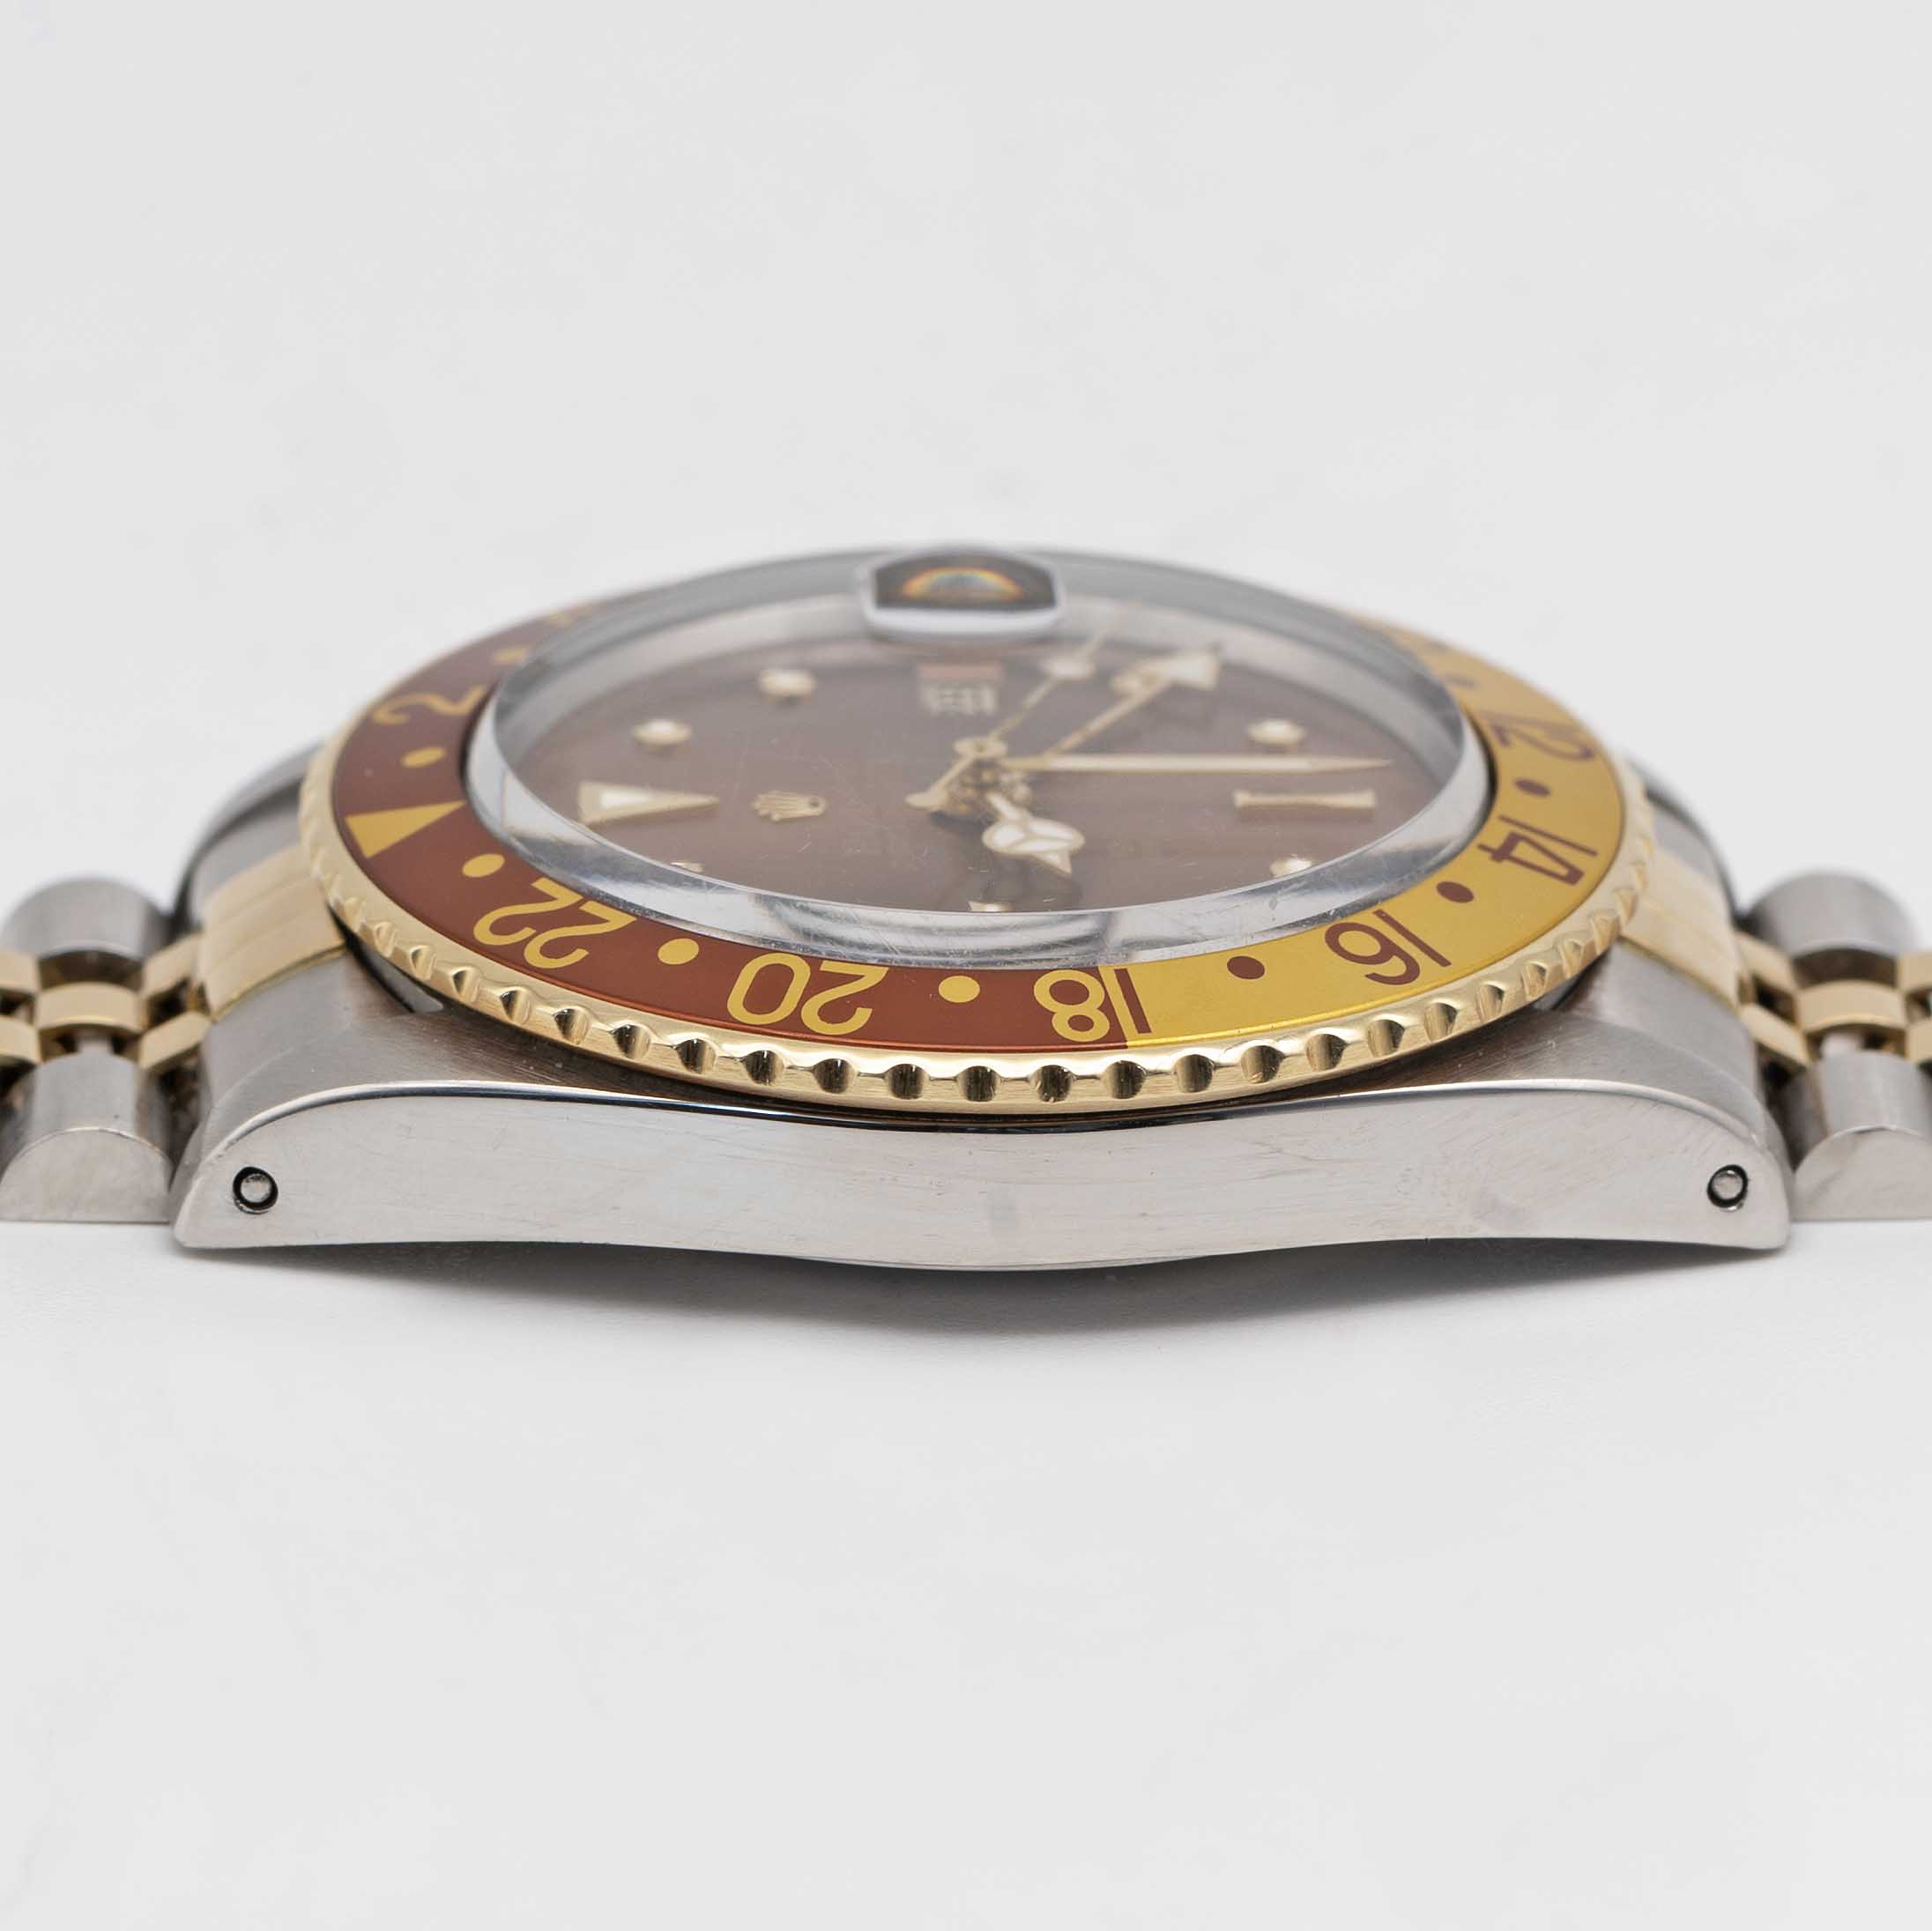 A GENTLEMAN'S STEEL & GOLD ROLEX OYSTER PERPETUAL GMT MASTER "ROOT BEER" BRACELET WATCH CIRCA - Image 9 of 9